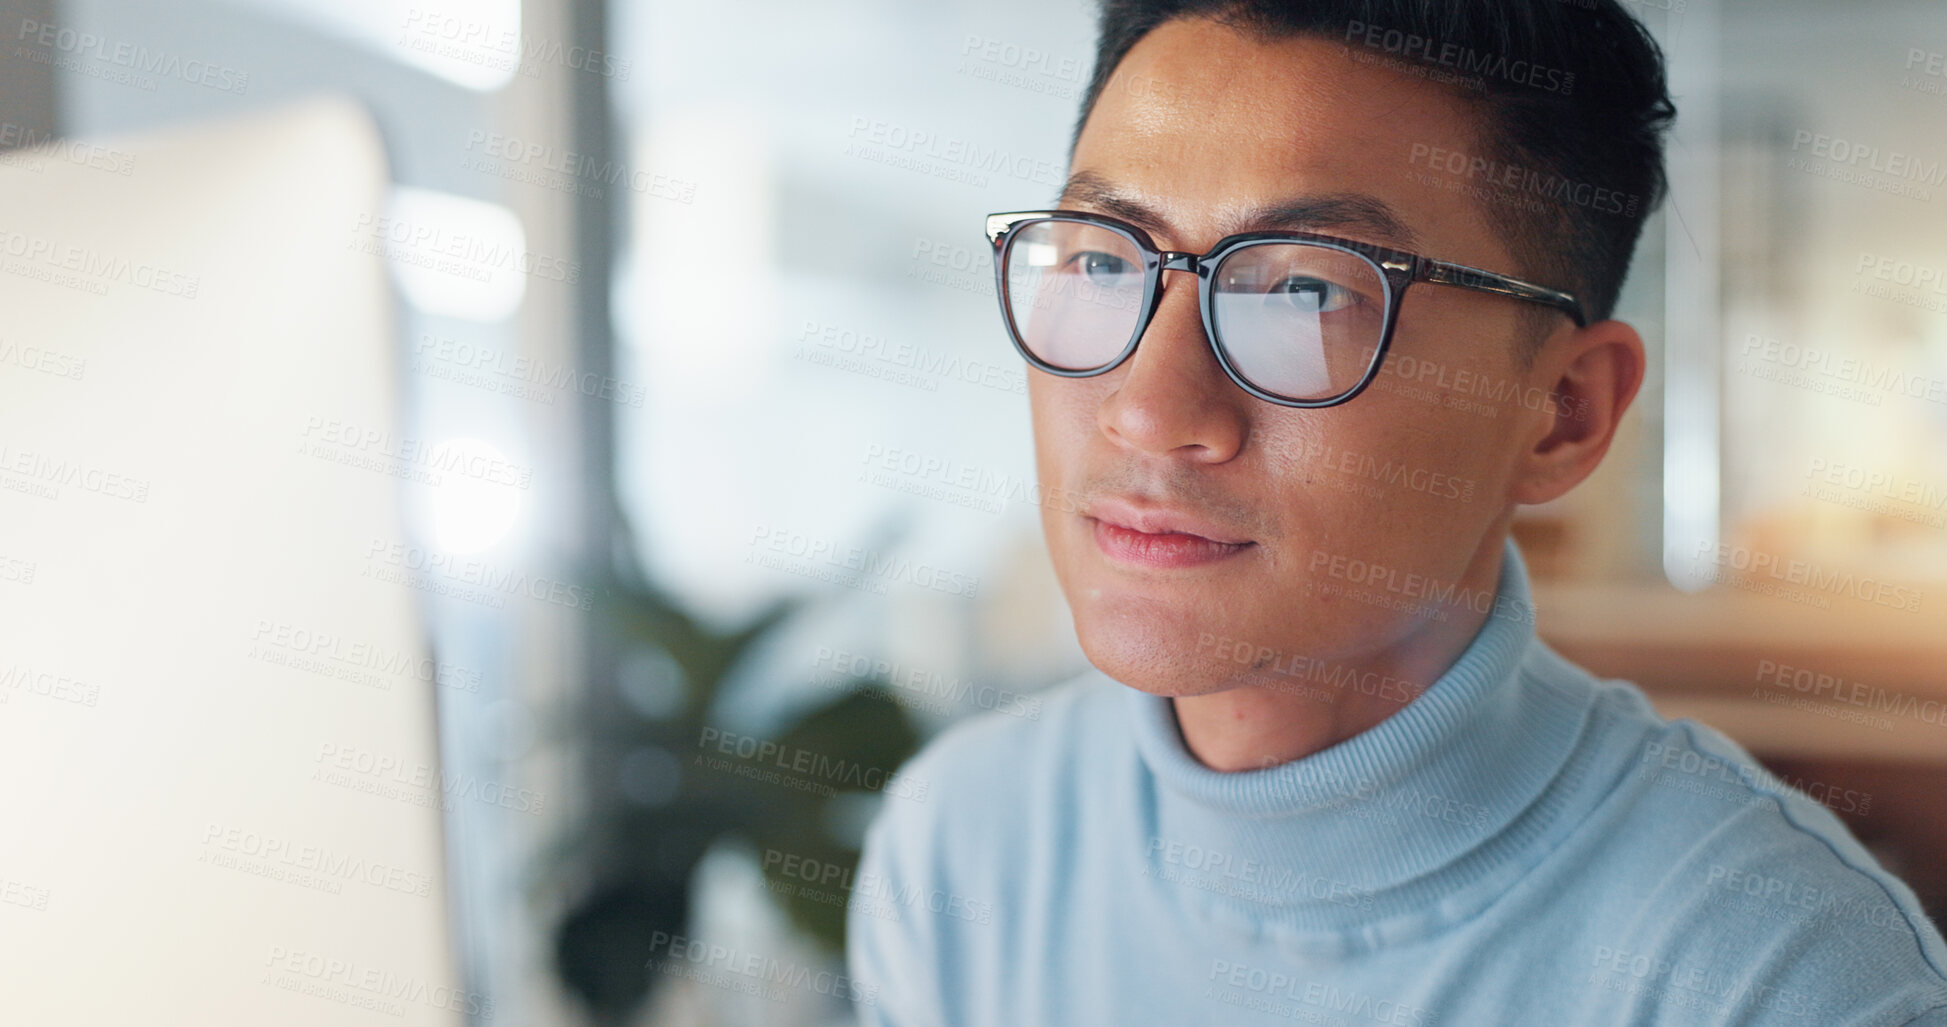 Buy stock photo Asian man at computer, glasses and reflection, thinking and reading email, review or article at digital agency. Internet, research and businessman at tech startup with report, networking or feedback.